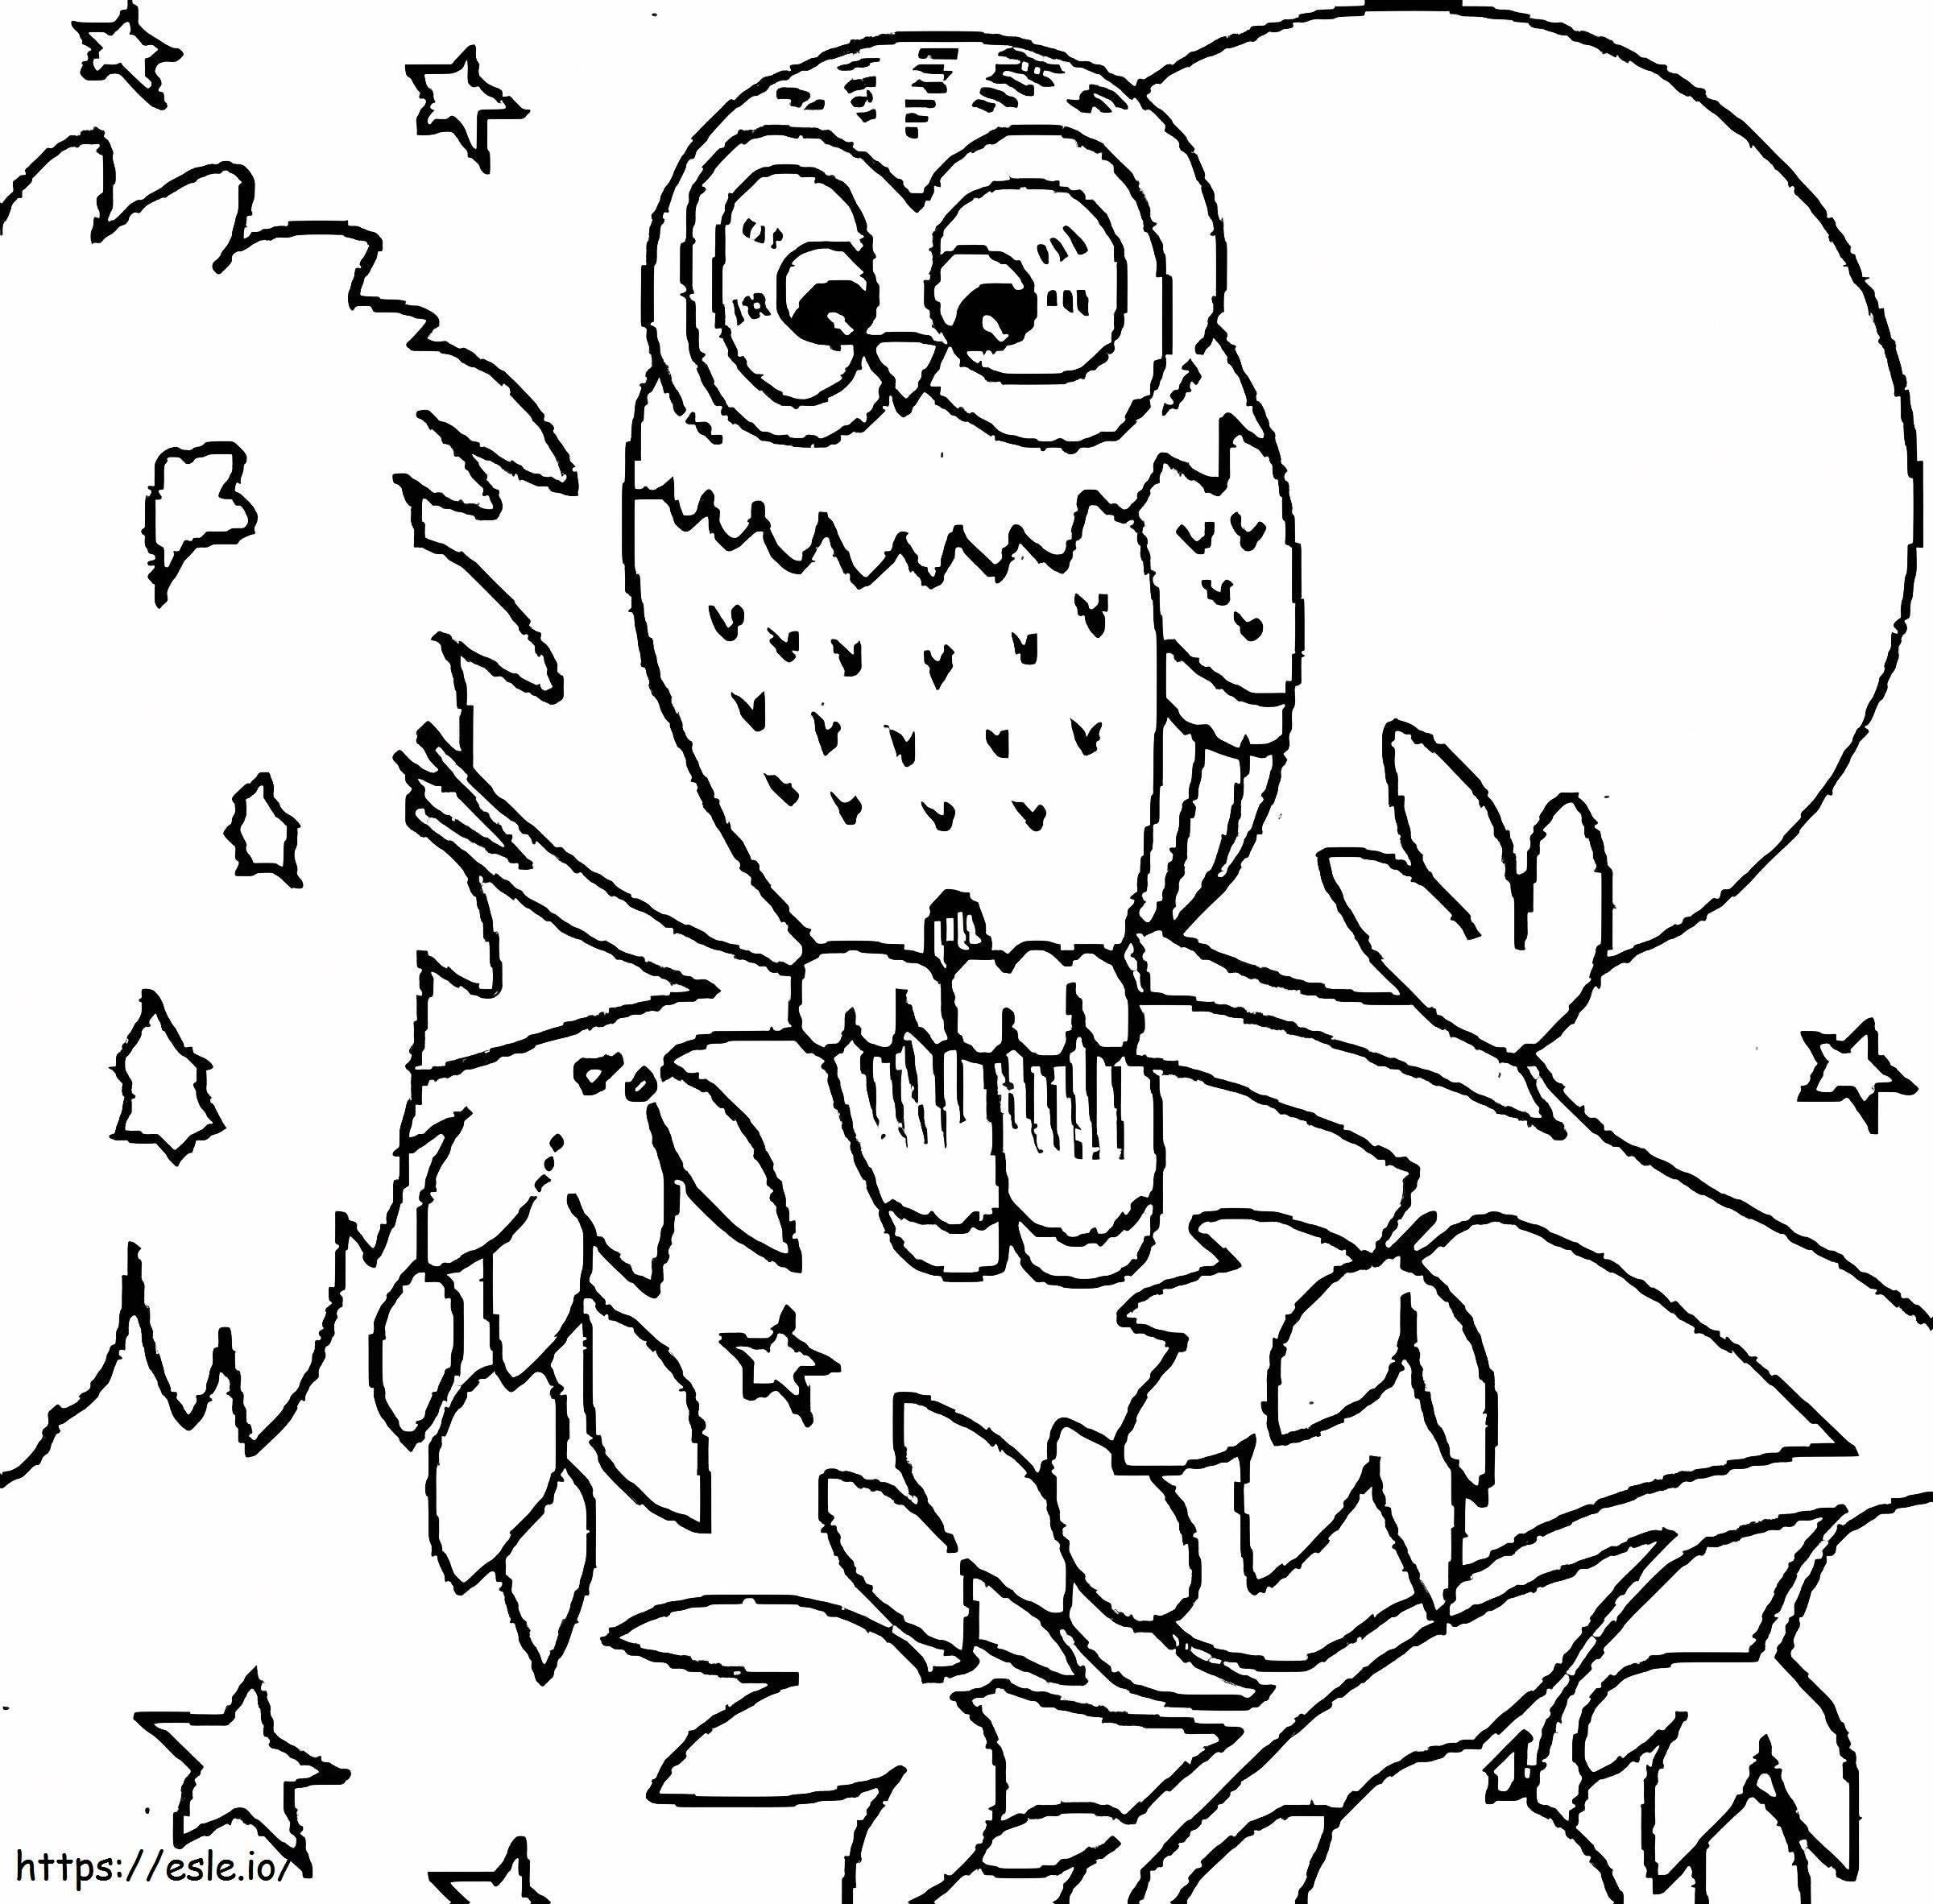 Perfect Owl coloring page